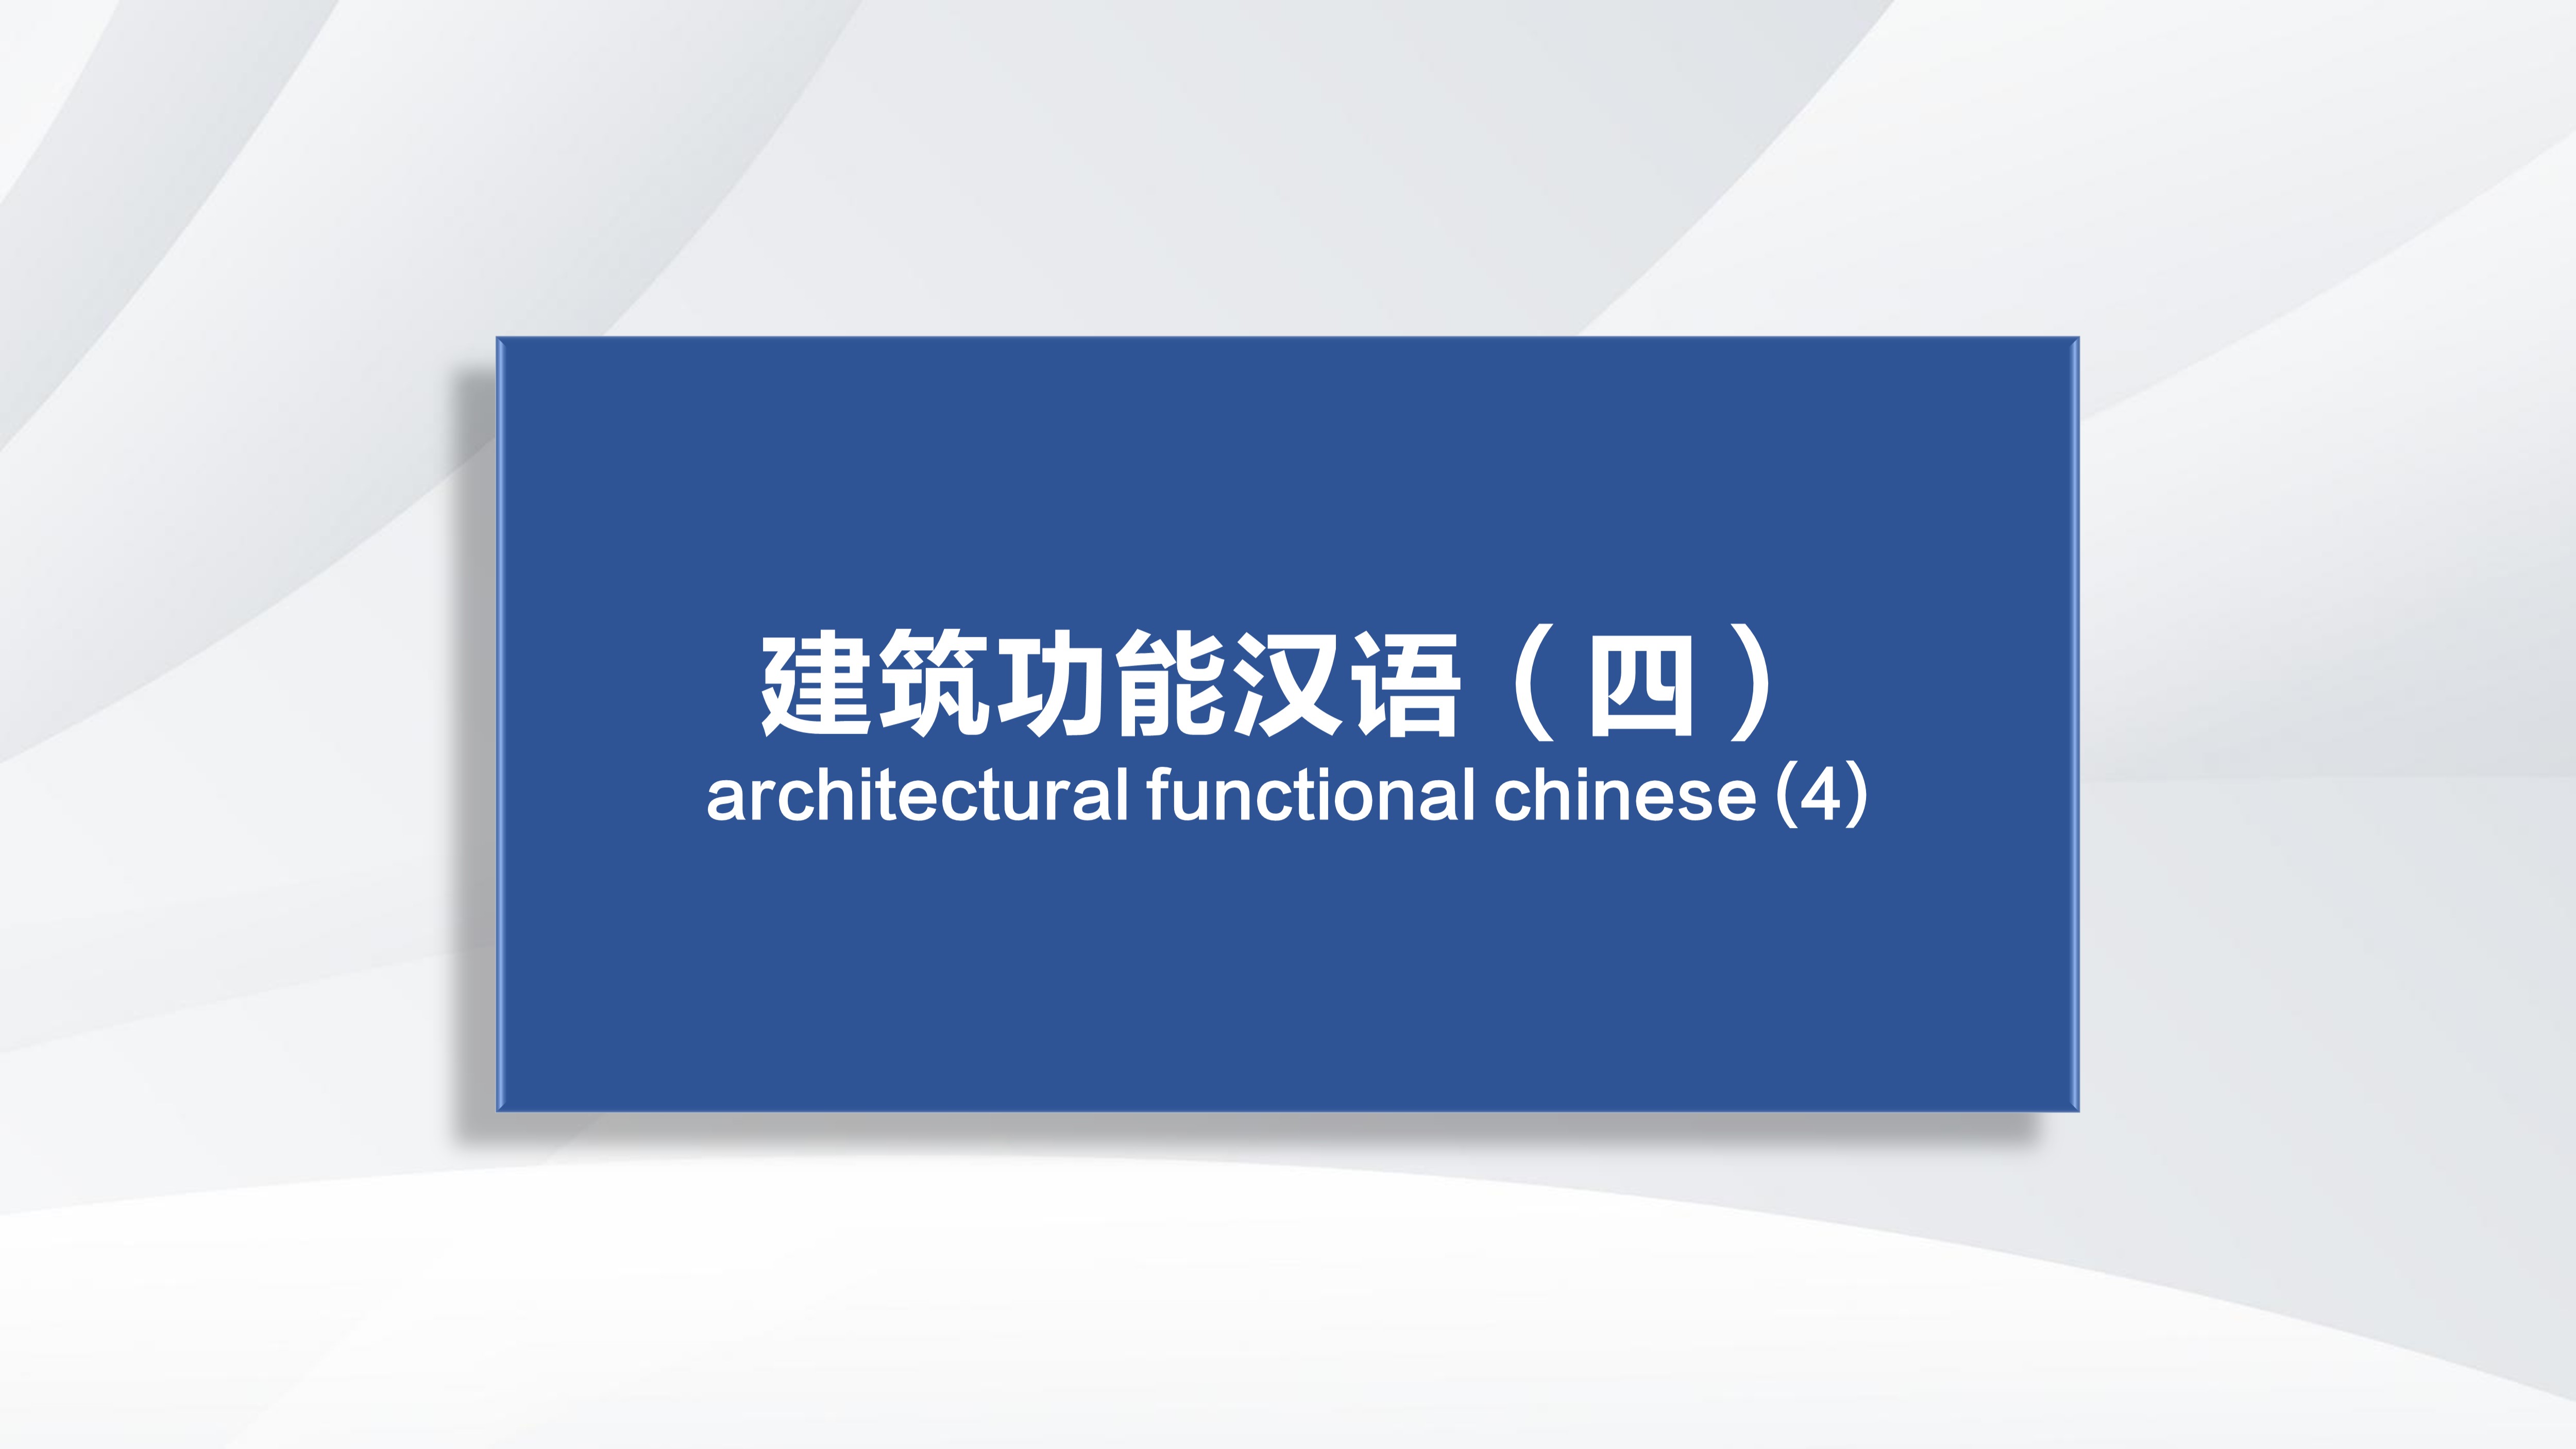 Architectural Functional Chinese (4)